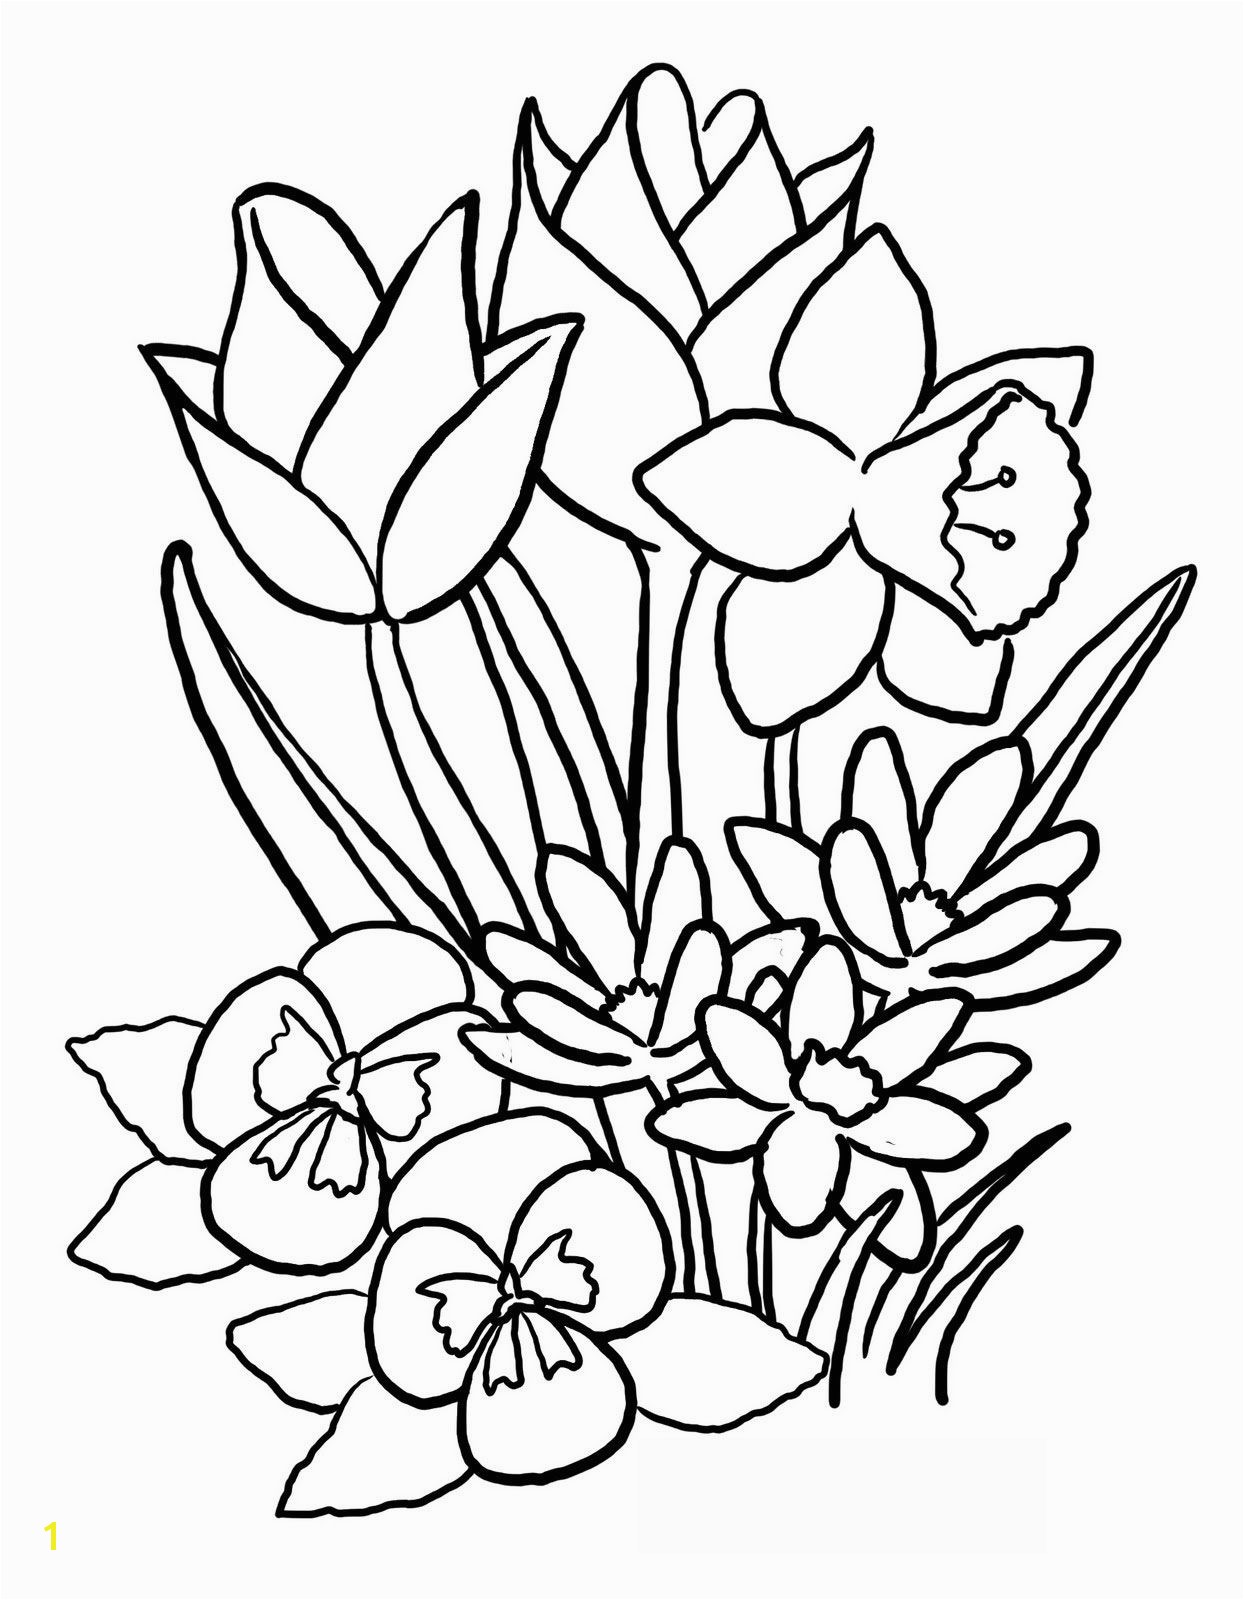 Flowers Coloring Pages Printable Flowers Coloring Pages Printable Flower Coloring Pages these